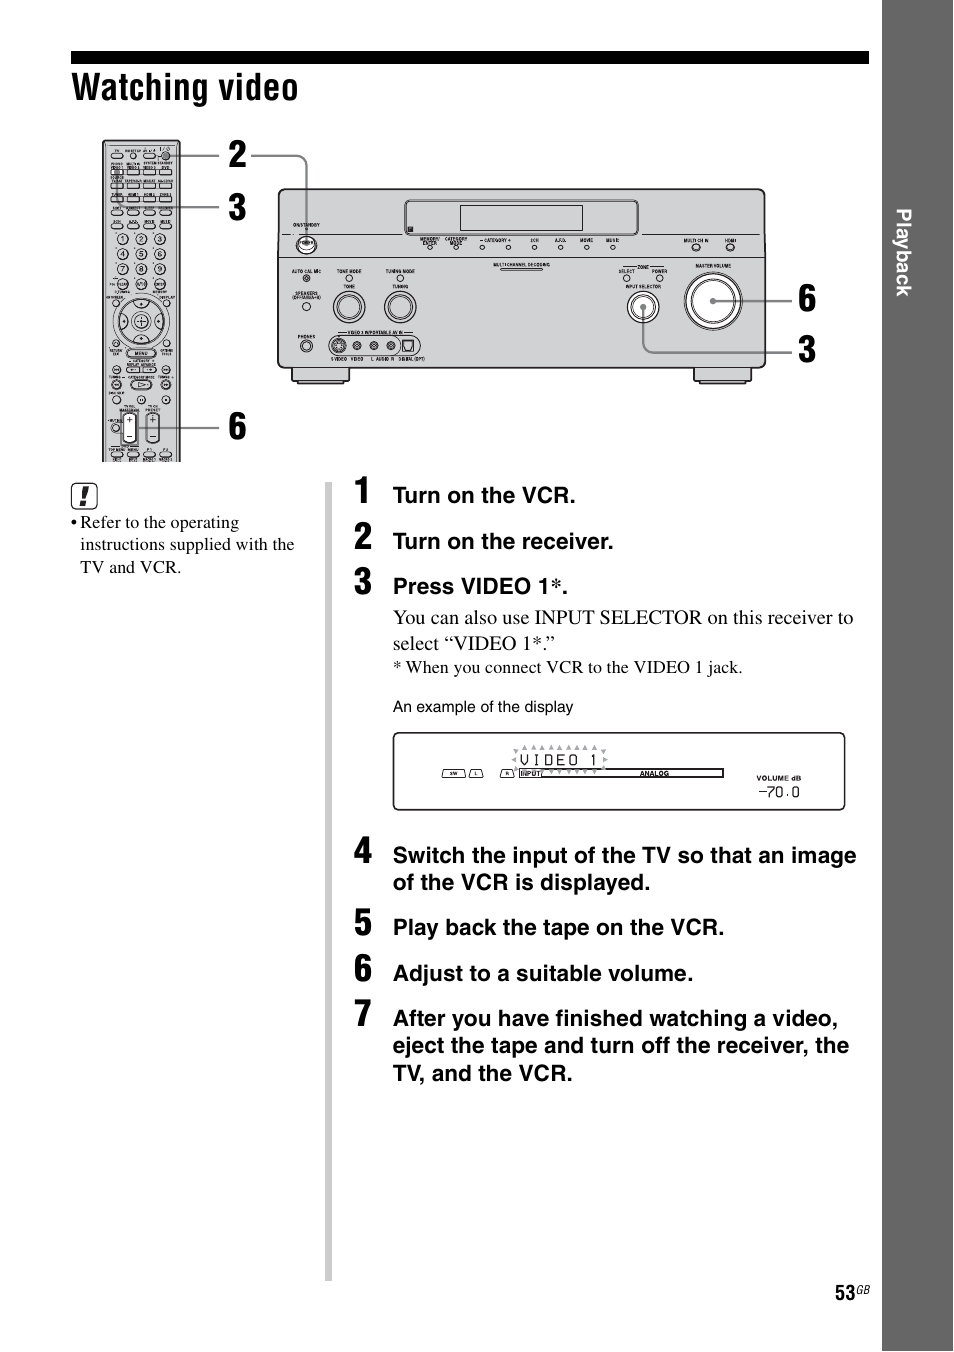 Watching video | Sony STR-DG1000 User Manual | Page 53 / 123